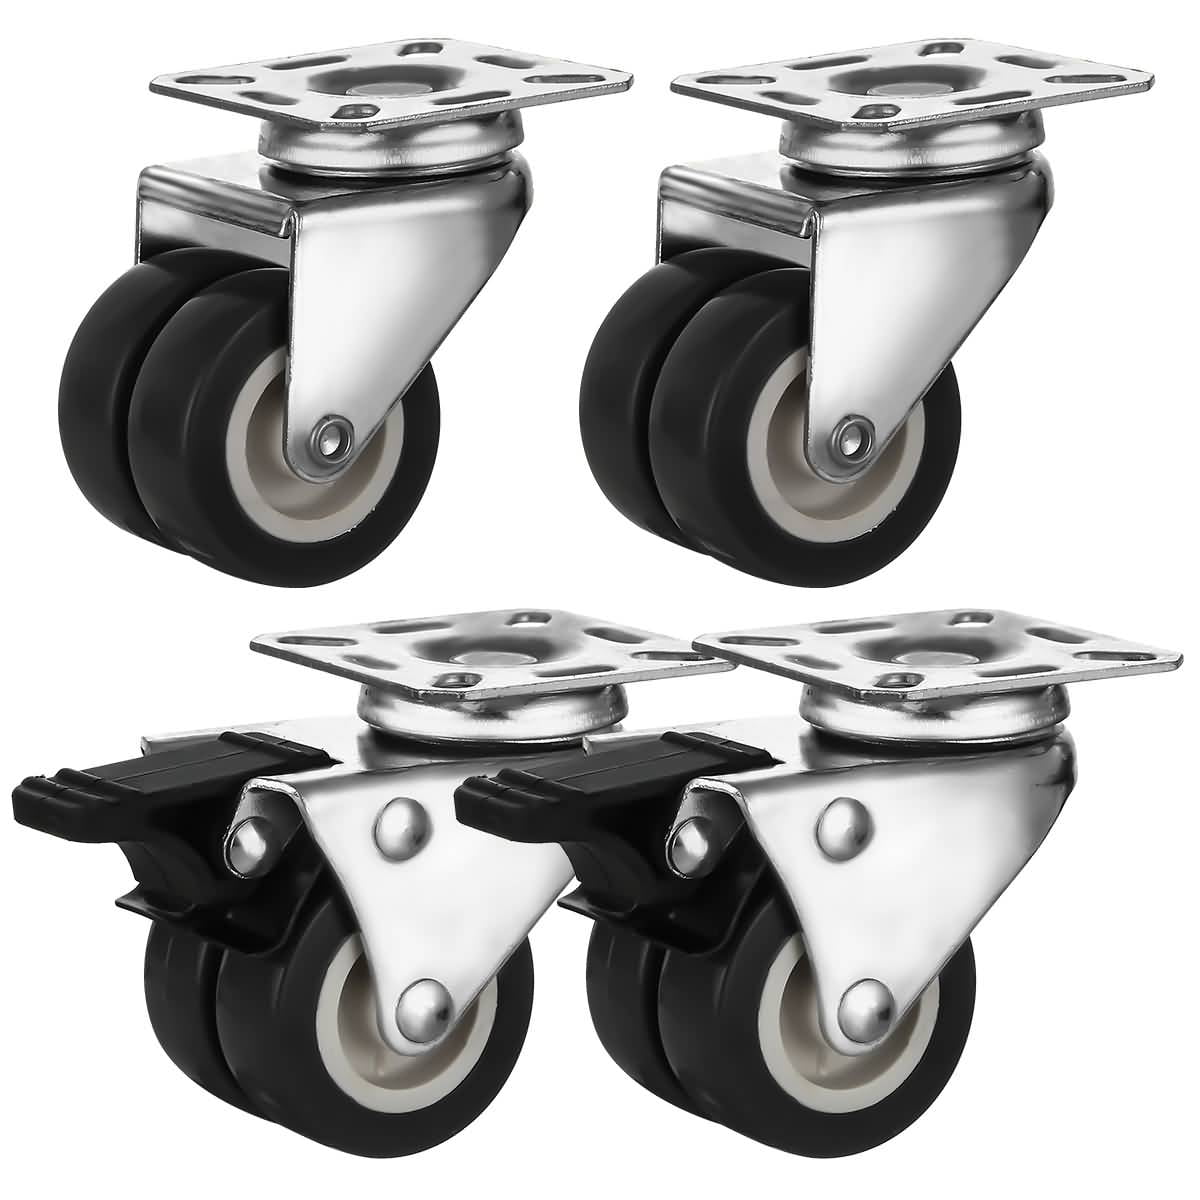 Pack of 2 sourcing map Swivel Caster Wheels with Brake 4.5 Polyurethane with 360 Degree Top Plate 330LBS Capacity for Furniture Carts Workbench Black 